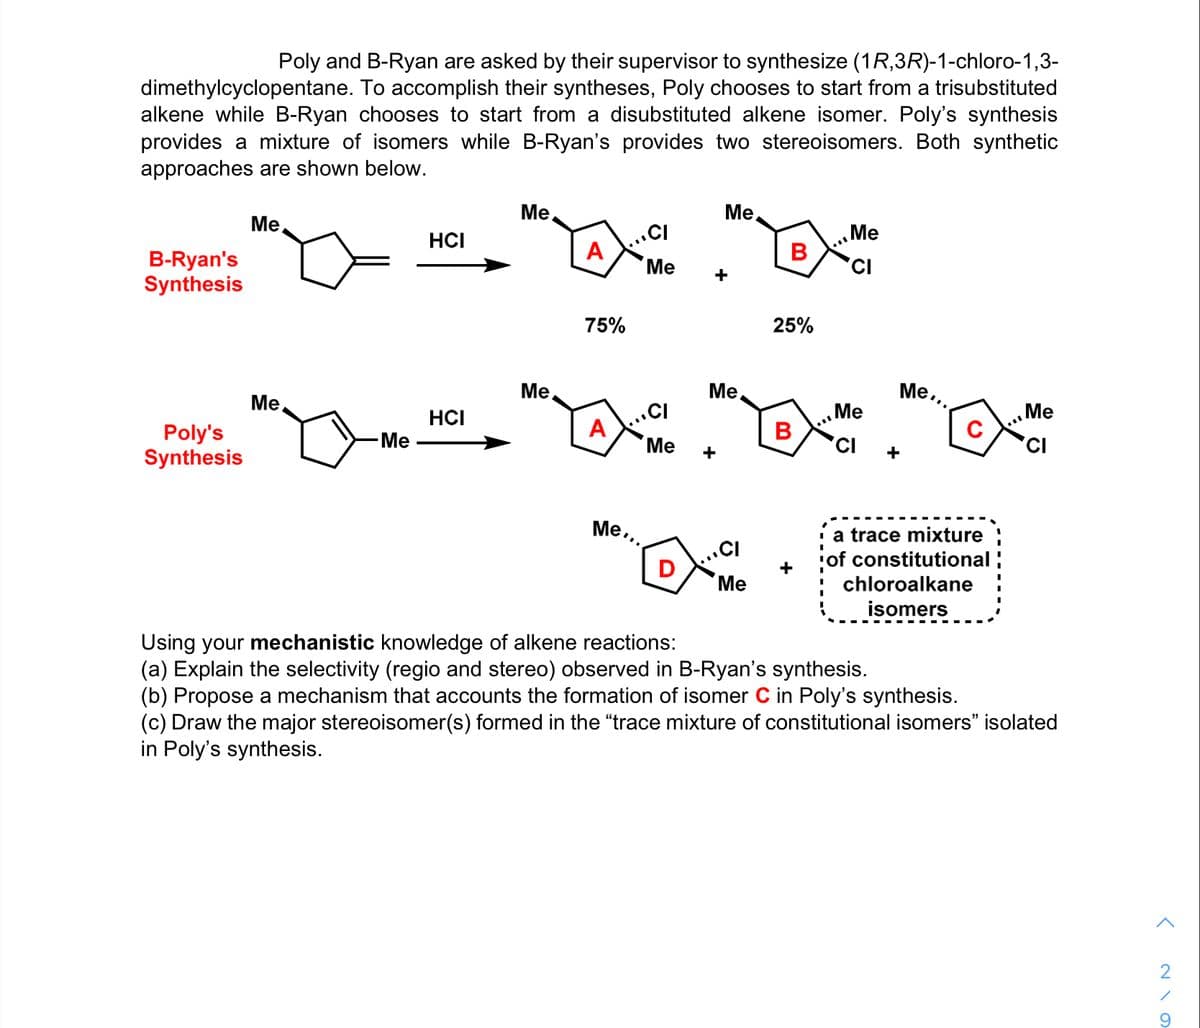 Poly and B-Ryan are asked by their supervisor to synthesize (1R,3R)-1-chloro-1,3-
dimethylcyclopentane. To accomplish their syntheses, Poly chooses to start from a trisubstituted
alkene while B-Ryan chooses to start from a disubstituted alkene isomer. Poly's synthesis
provides a mixture of isomers while B-Ryan's provides two stereoisomers. Both synthetic
approaches are shown below.
Me
Me,
Me,
.CI
Me
HCI
A
B-Ryan's
Synthesis
Me
'CI
+
75%
25%
Ме
Me
Me
Me...
Me
B
Me
C
HCI
A
Poly's
Synthesis
-Me
Ме
'CI
'CI
+
+
Me..
.CI
+
a trace mixture ;
of constitutional
D
Ме
chloroalkane
isomers
Using your mechanistic knowledge of alkene reactions:
(a) Explain the selectivity (regio and stereo) observed in B-Ryan's synthesis.
(b) Propose a mechanism that accounts the formation of isomer C in Poly's synthesis.
(c) Draw the major stereoisomer(s) formed in the "trace mixture of constitutional isomers" isolated
in Poly's synthesis.
9.
